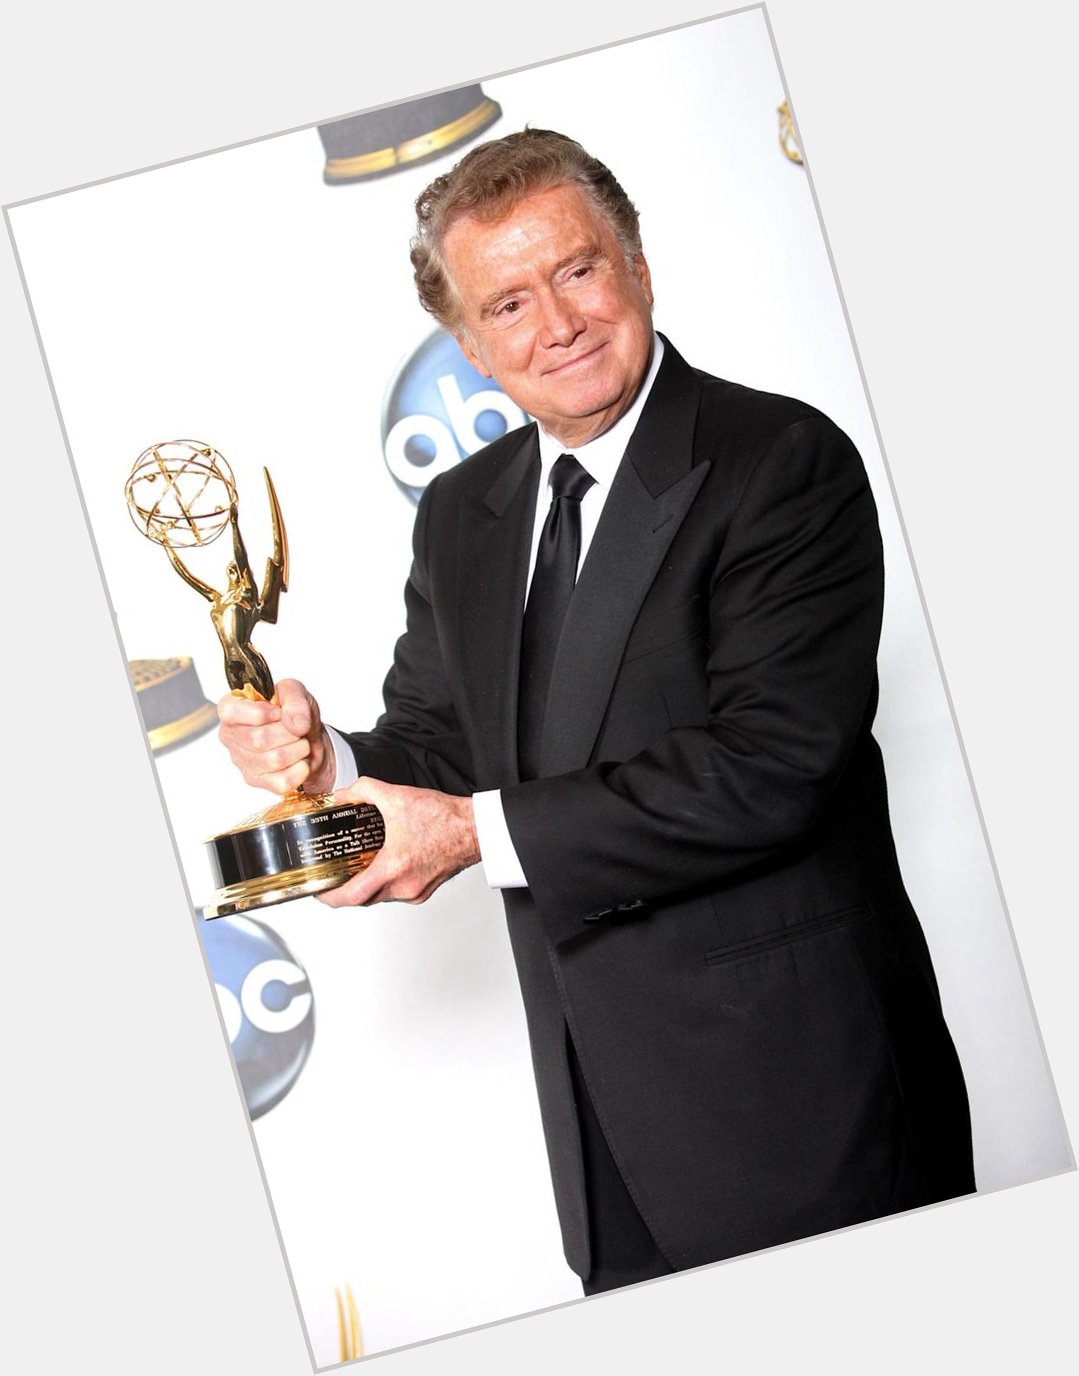 HAPPY BIRTHDAY TO THE LATE REGIS PHILBIN WHO WOULD\VE TURNED 91 TODAY. 